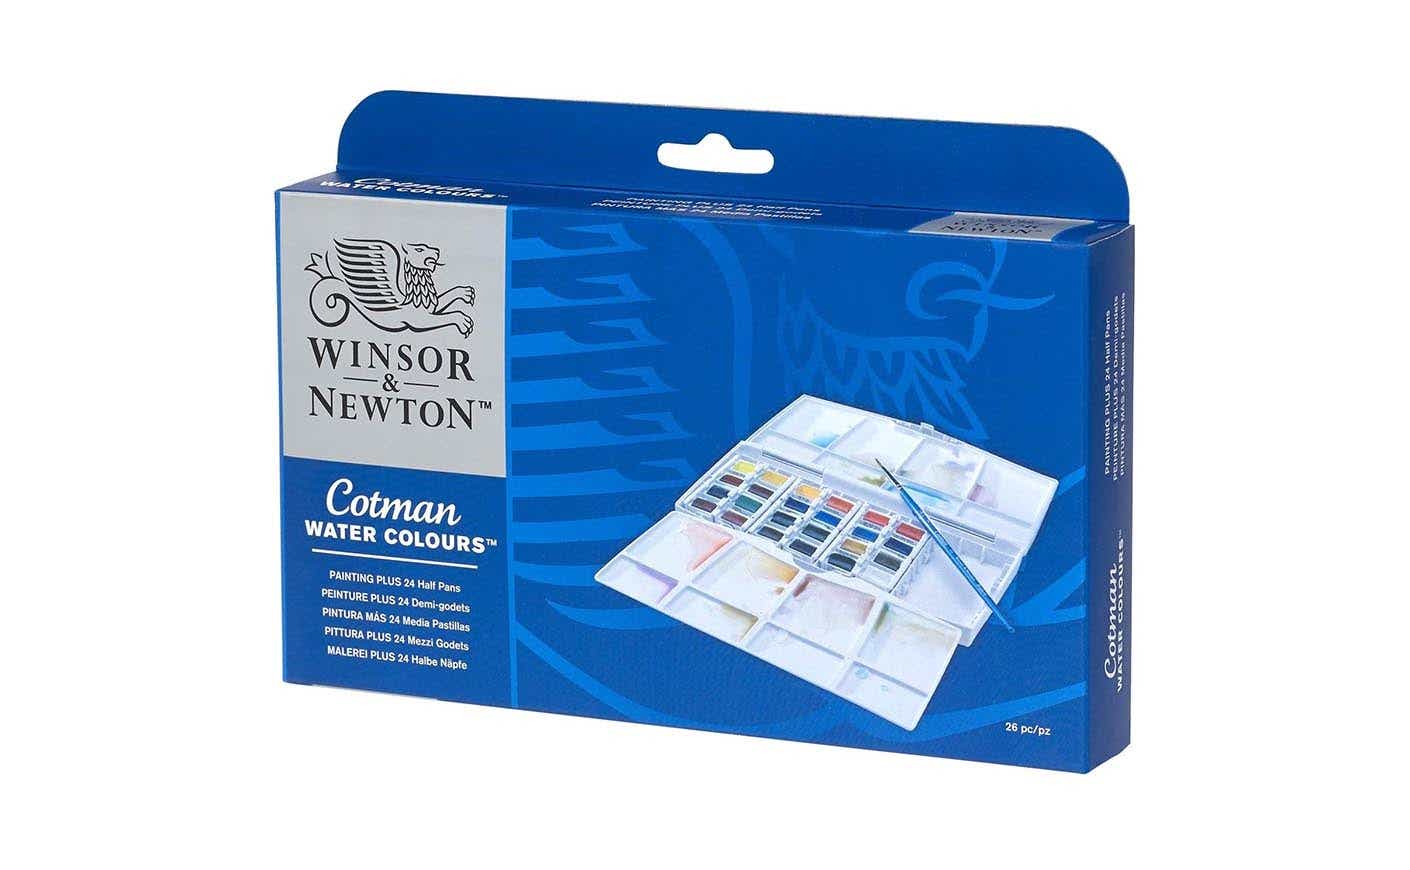 Winsor and Newton watercolors